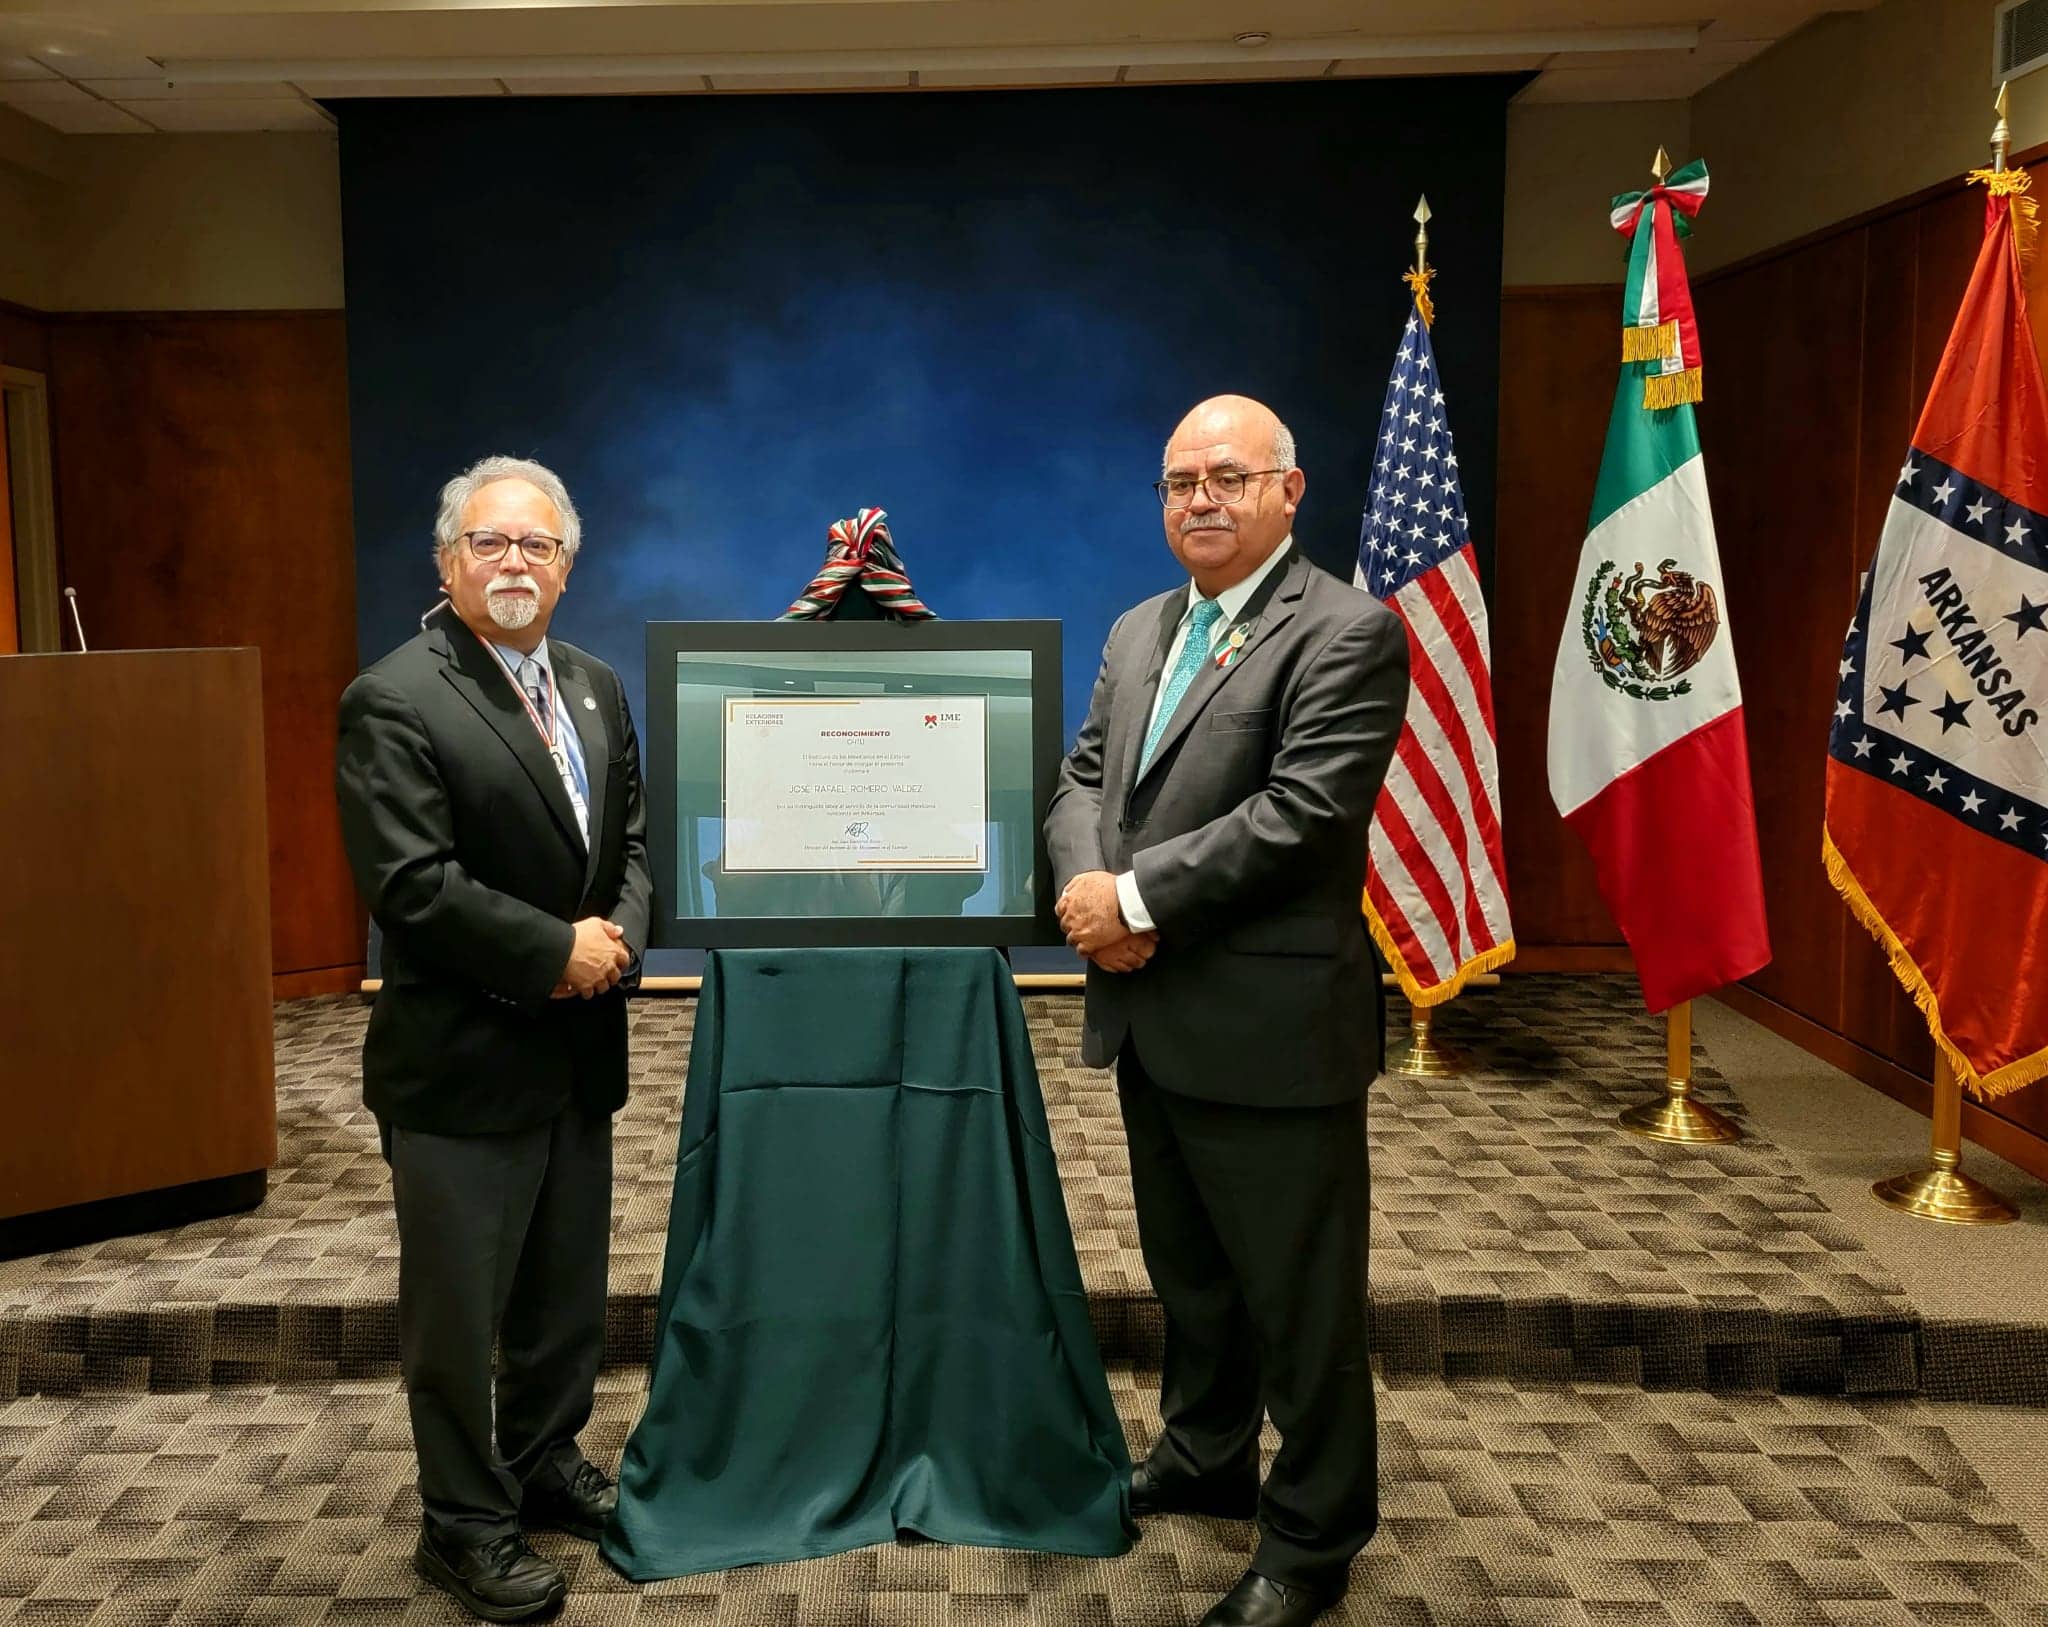 Jose Romero, M.D., (left) received the Ohtli Award from Rodolfo Quilantan Arenas (right) from the Mexican Consulate in Little Rock. The Ohtli Award is the highest award given by the Mexican Secretariat of Foreign Affairs to persons residing outside of Mexico.